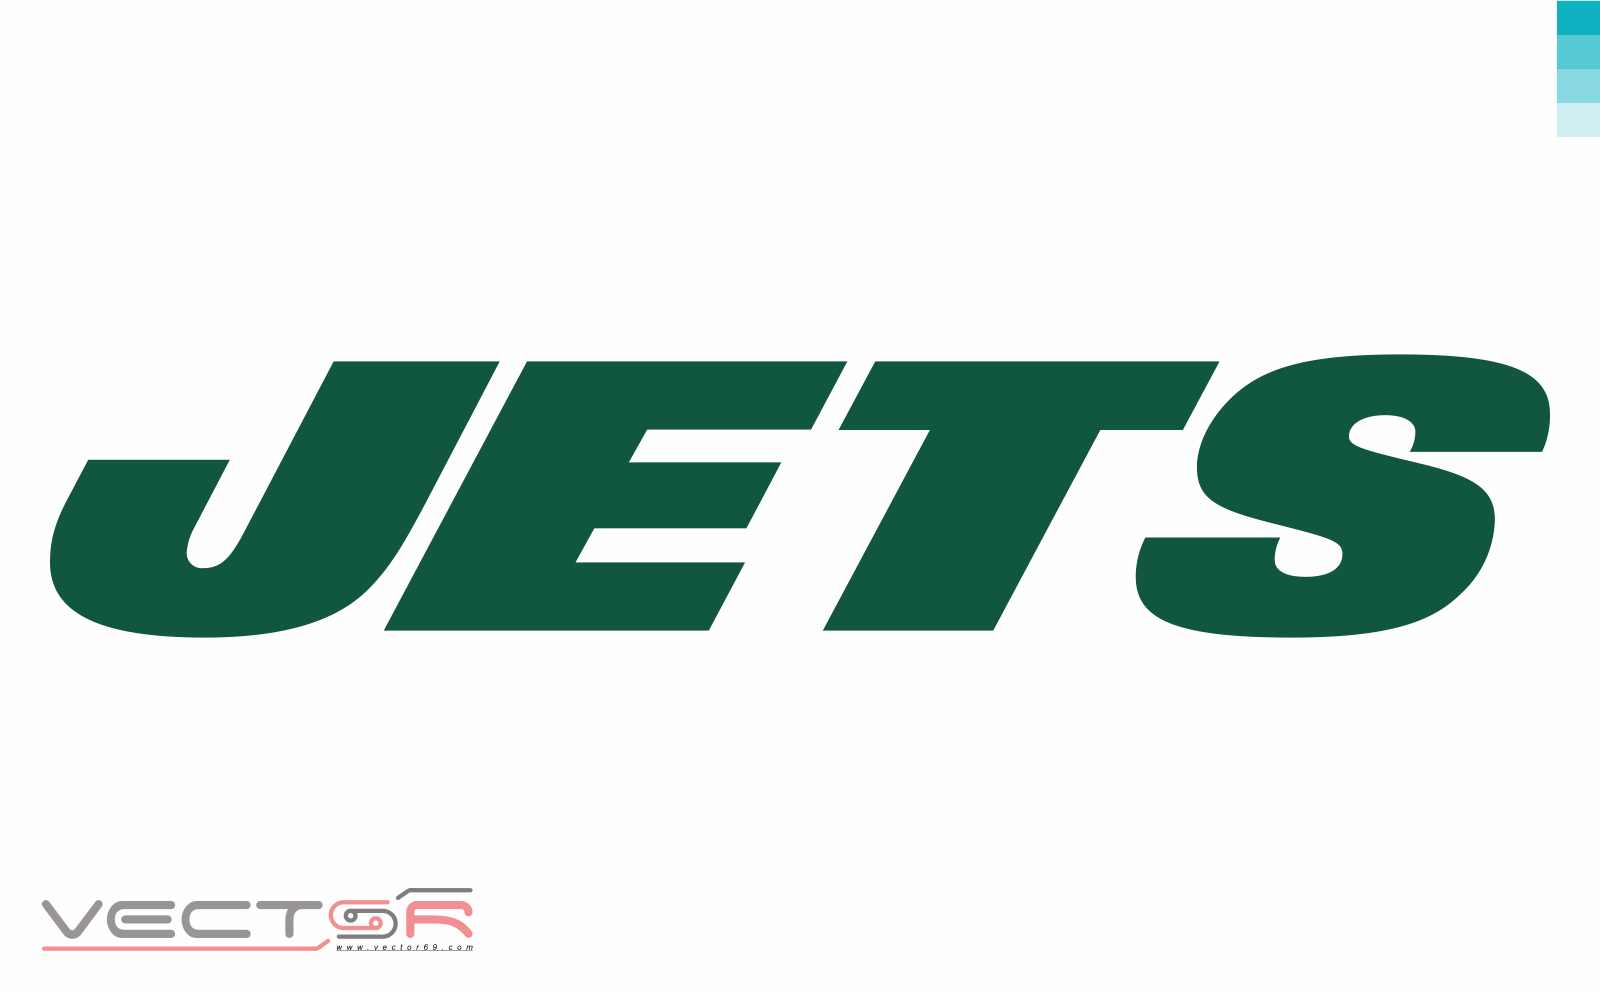 New York Jets Wordmark - Download Vector File SVG (Scalable Vector Graphics)